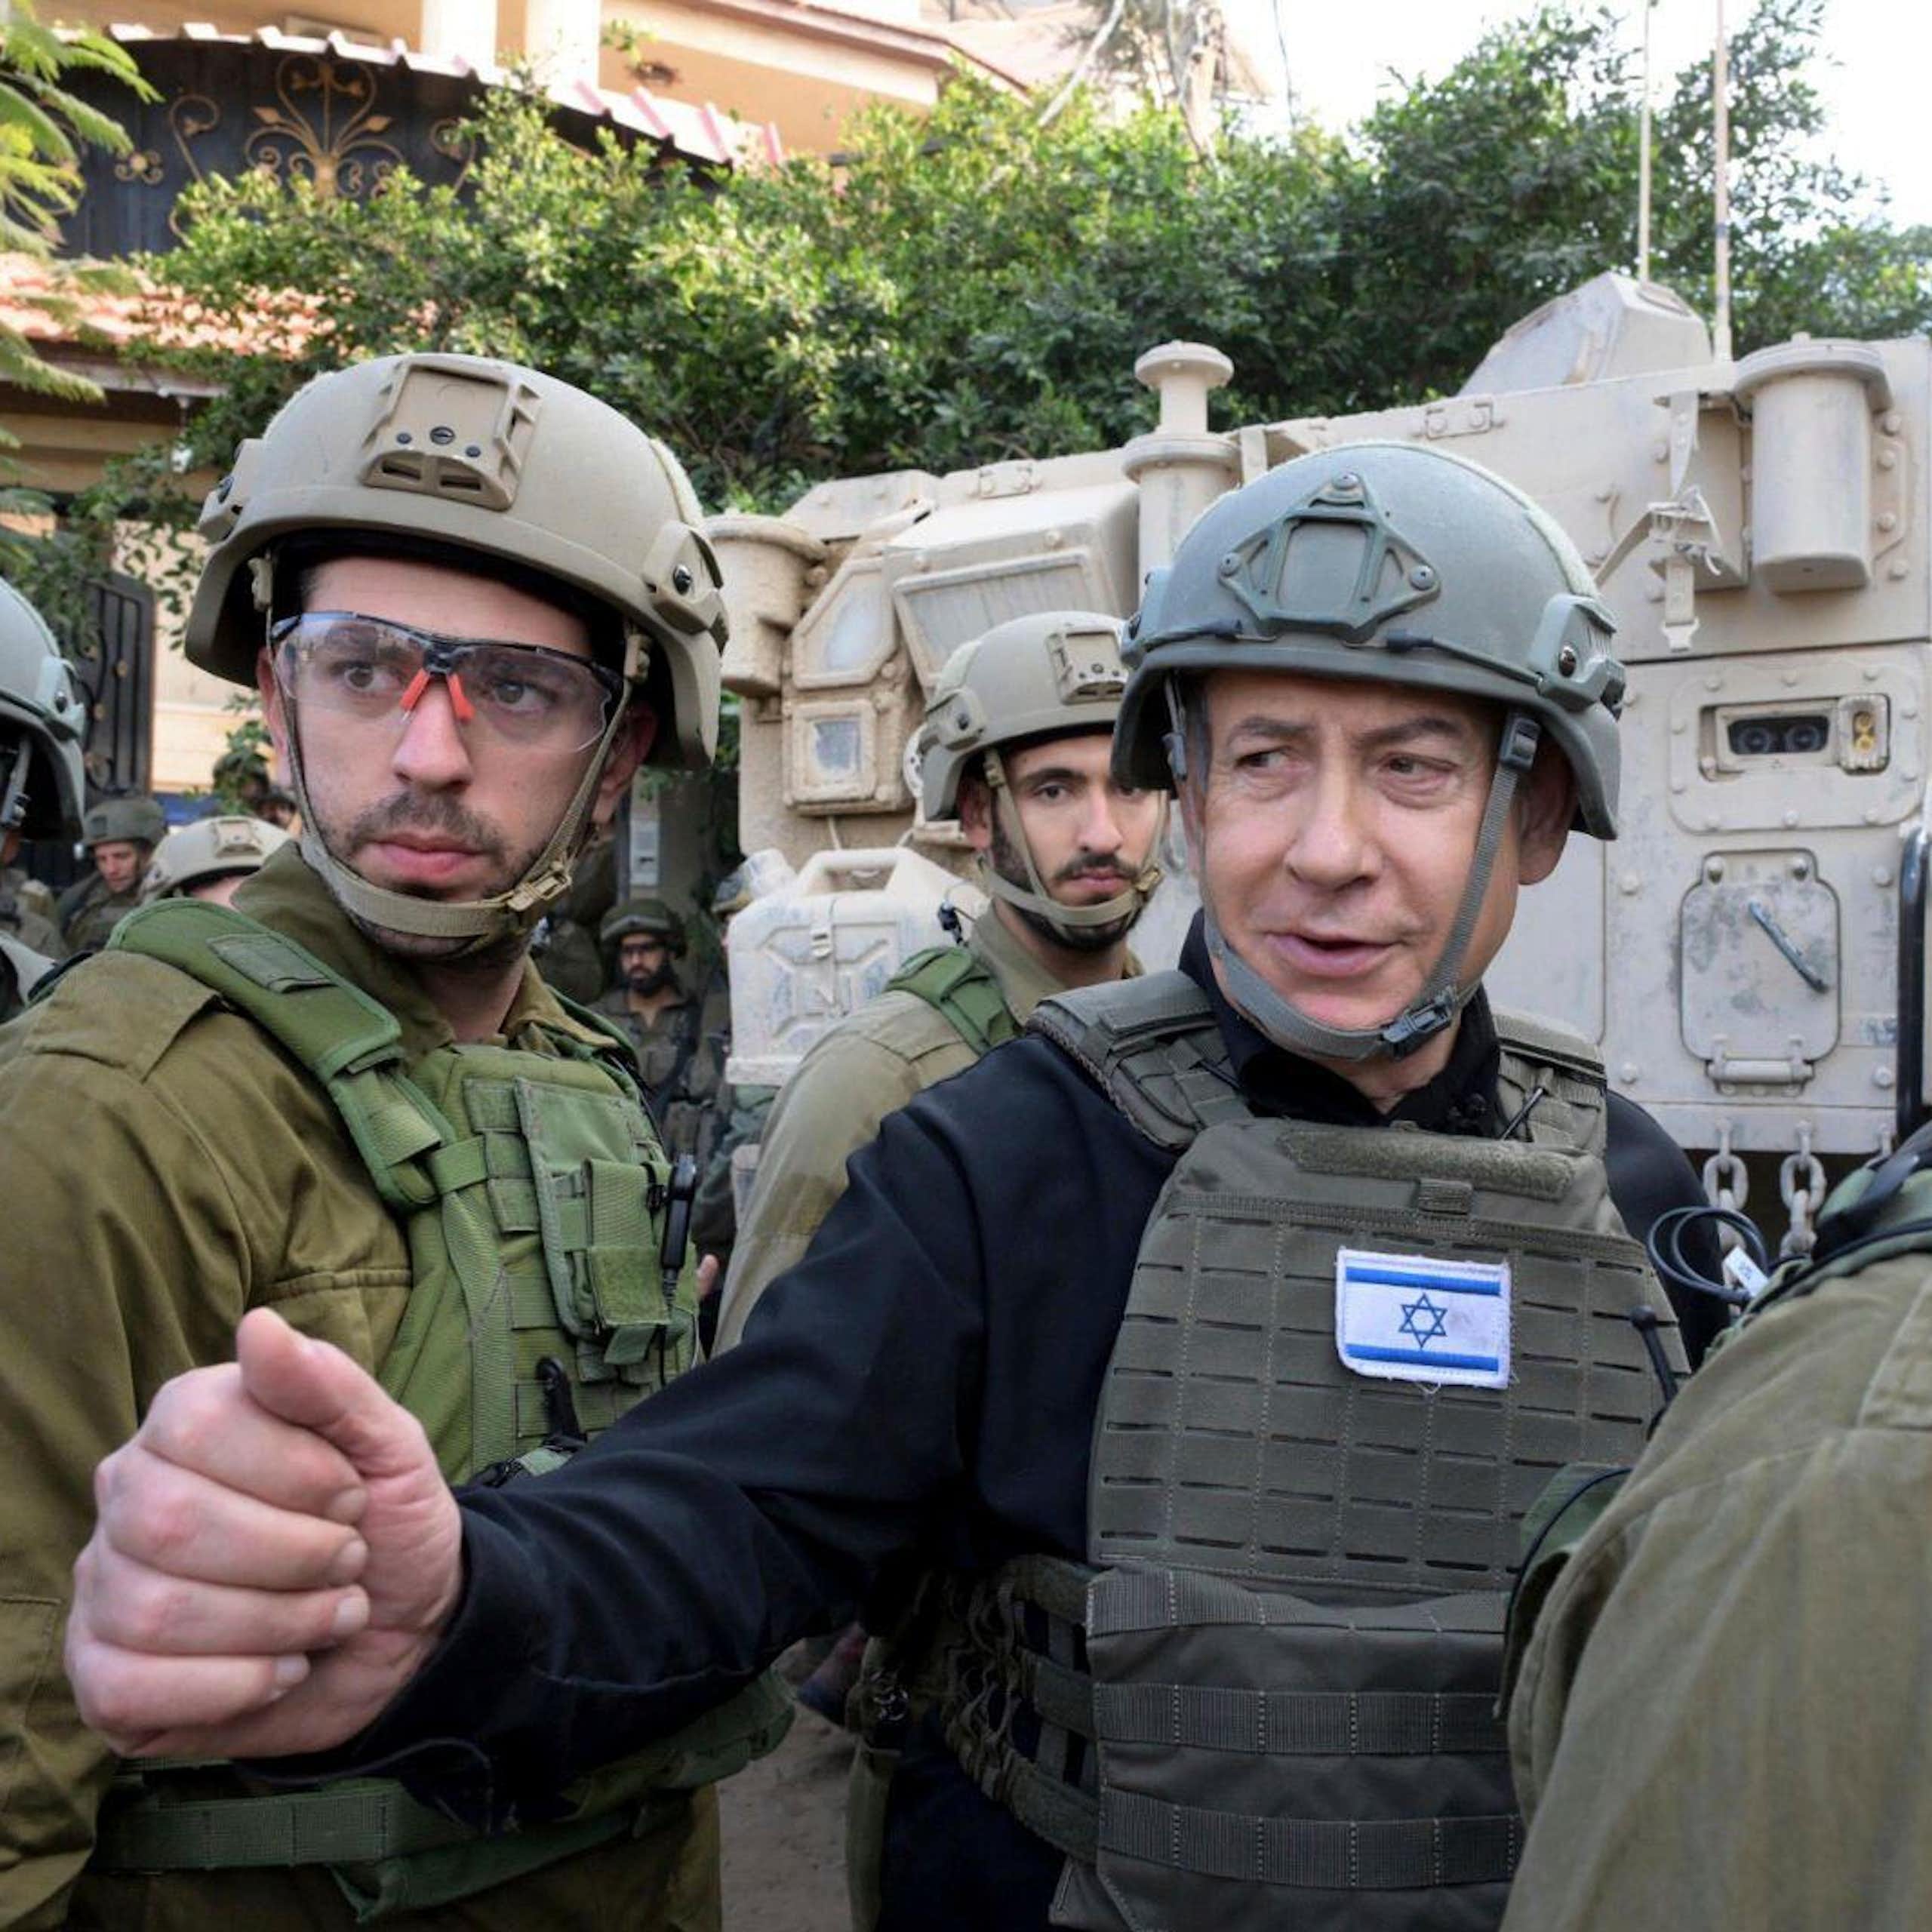 Israeli prime minister Benjamin Netanyahu dressed in combat gear with aides.